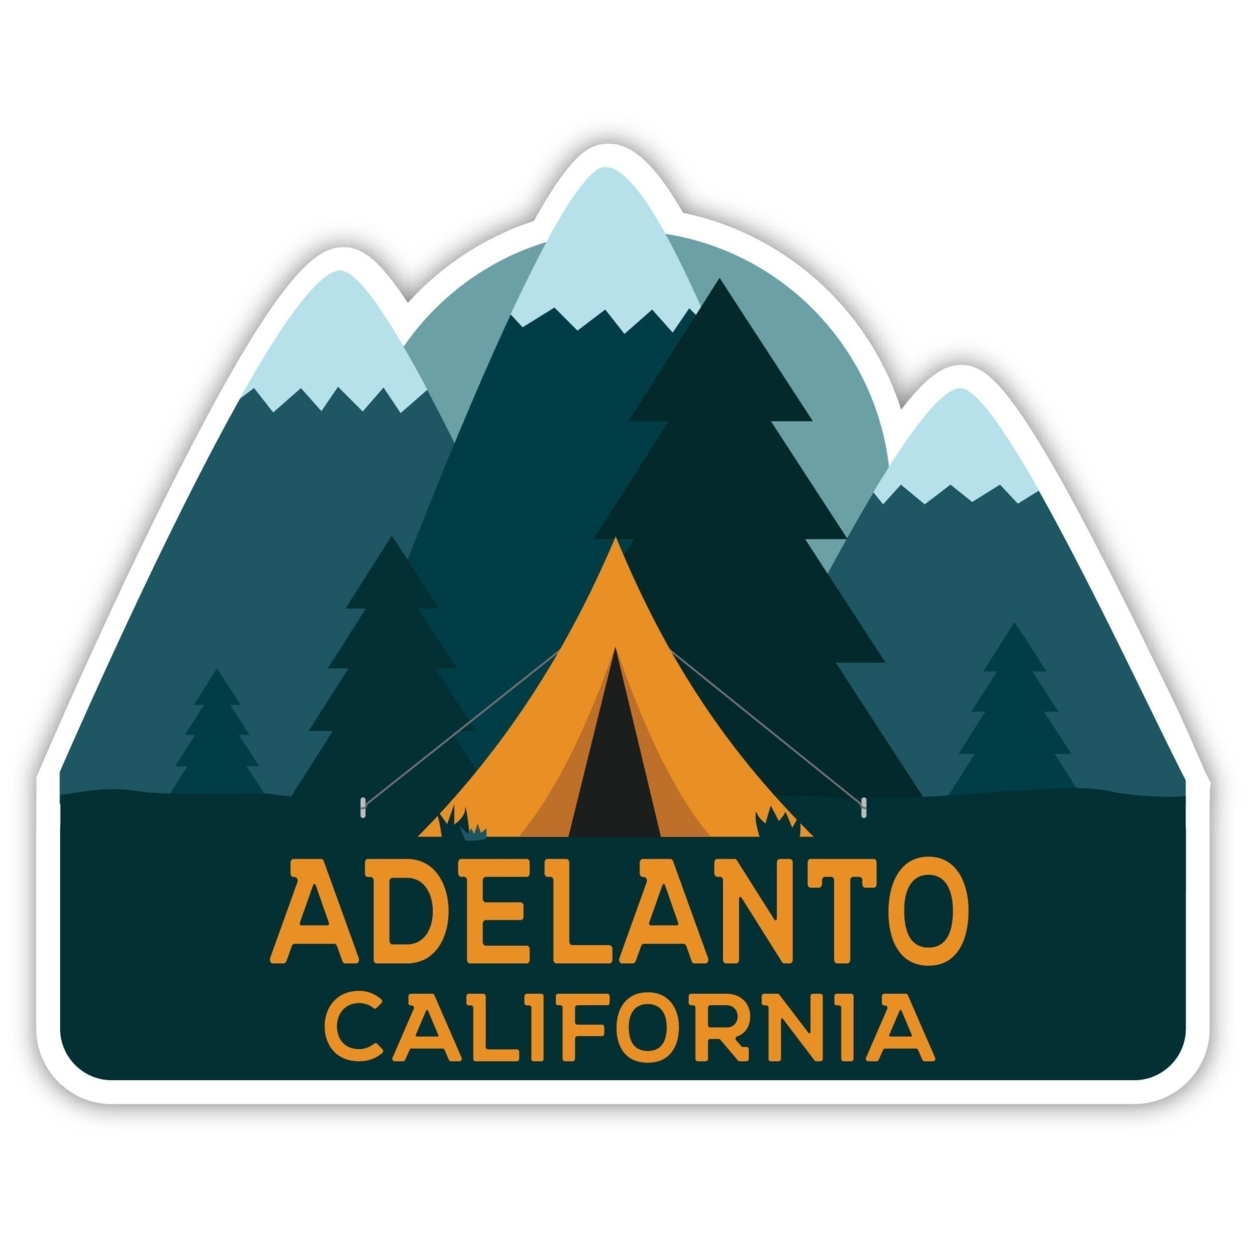 Adelanto California Souvenir Decorative Stickers (Choose Theme And Size) - 4-Pack, 2-Inch, Tent